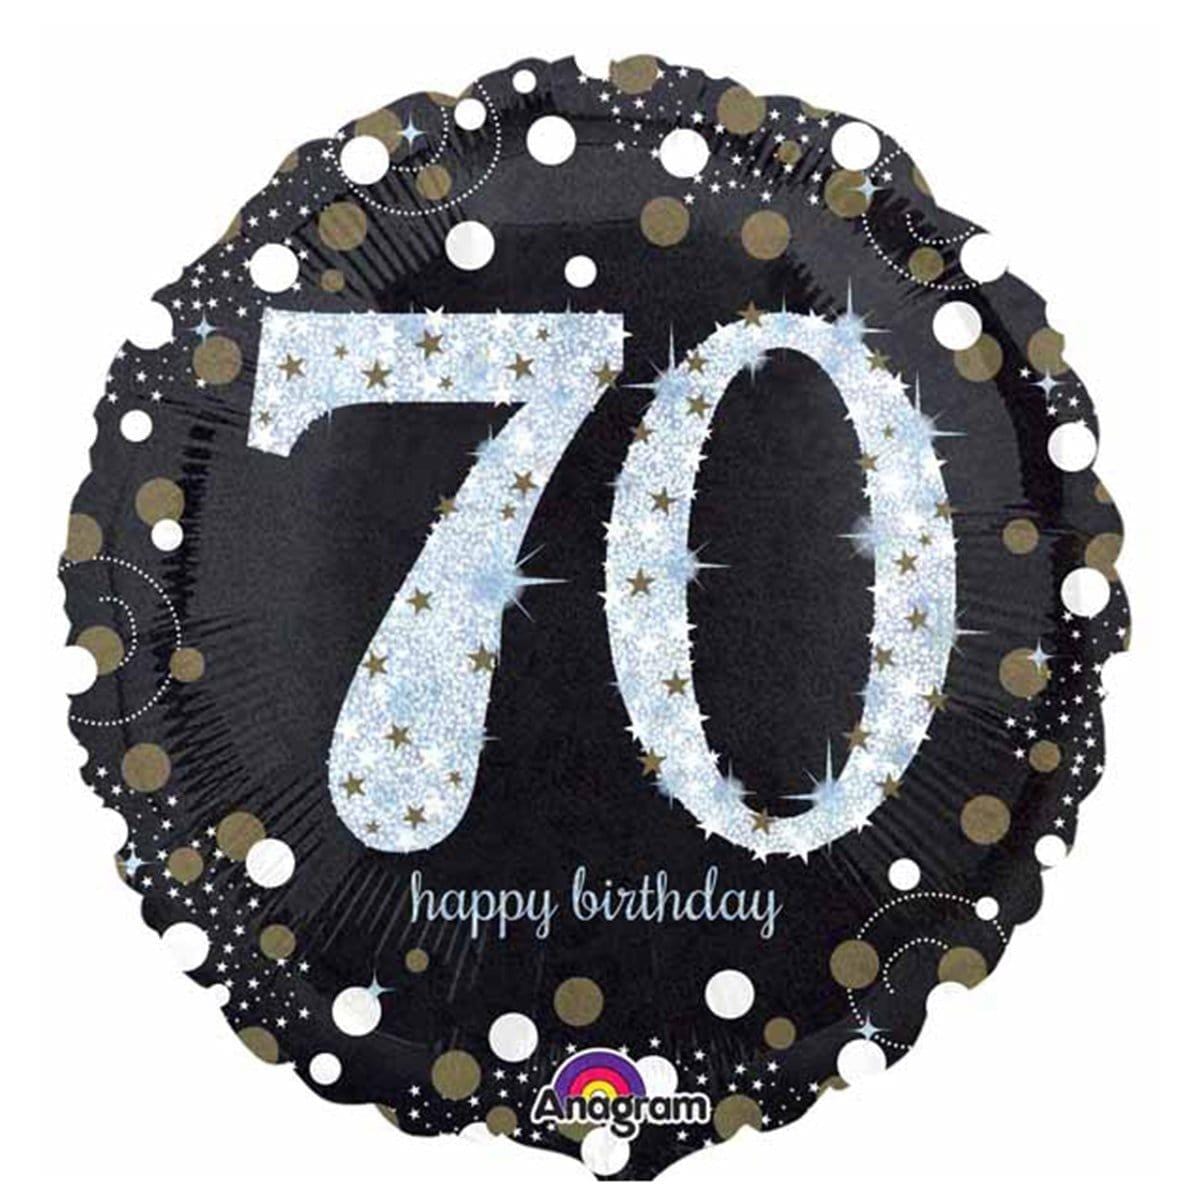 Buy Balloons Black And Gold 70th Birthday Foil Balloon, 18 Inches sold at Party Expert